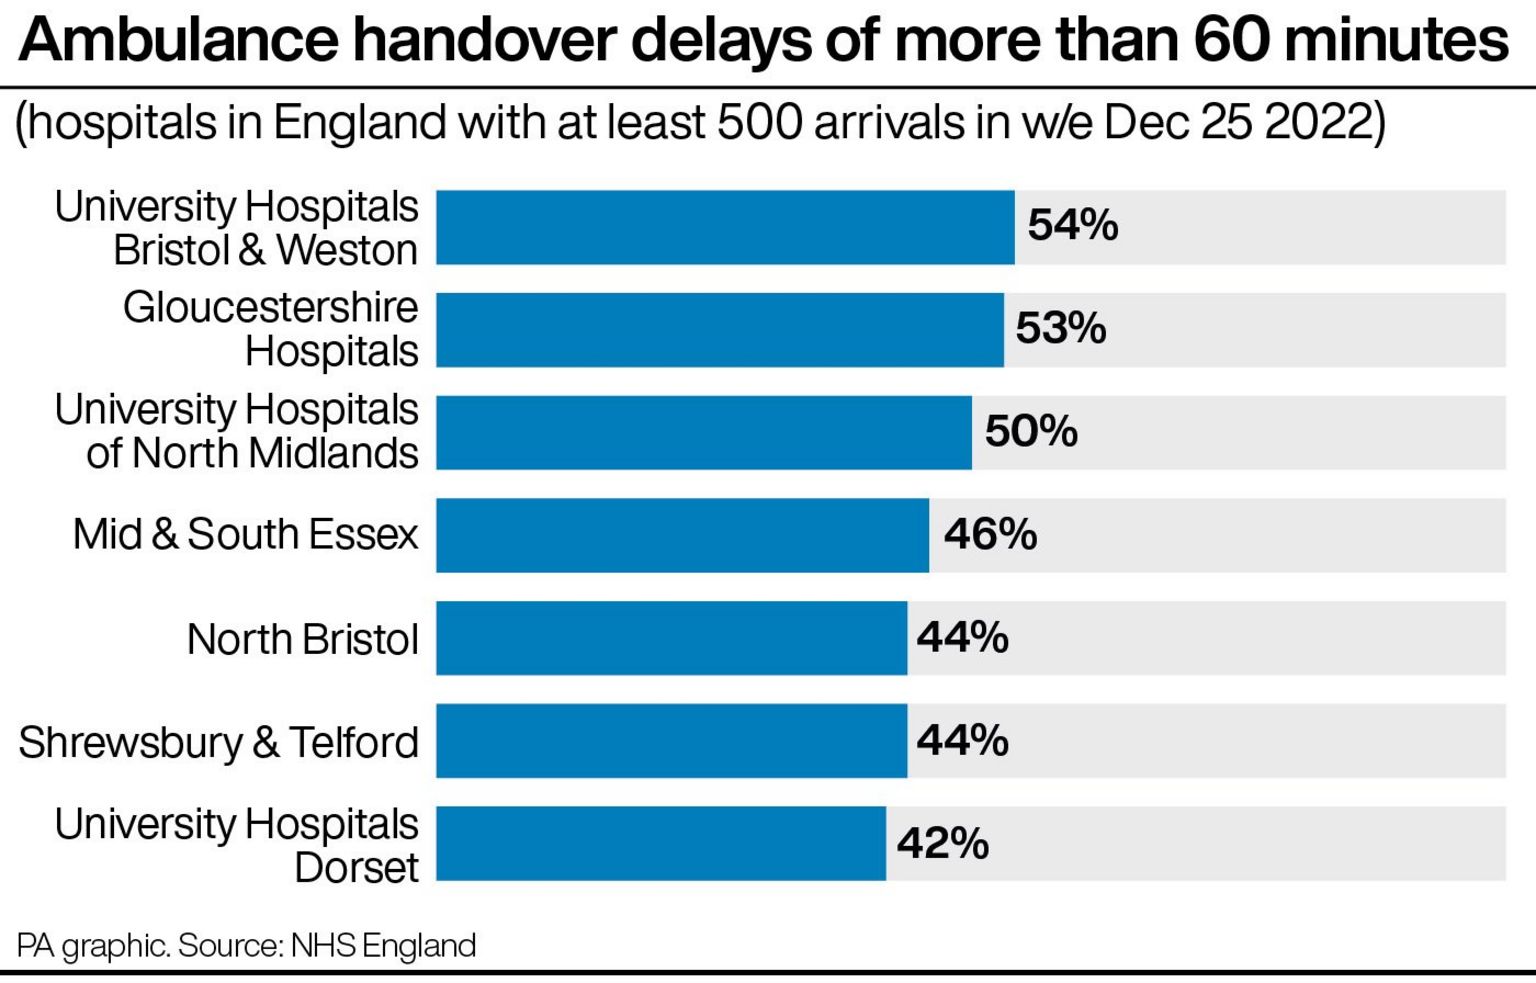 Graphic of ambulance handover delays of more than 60 minutes